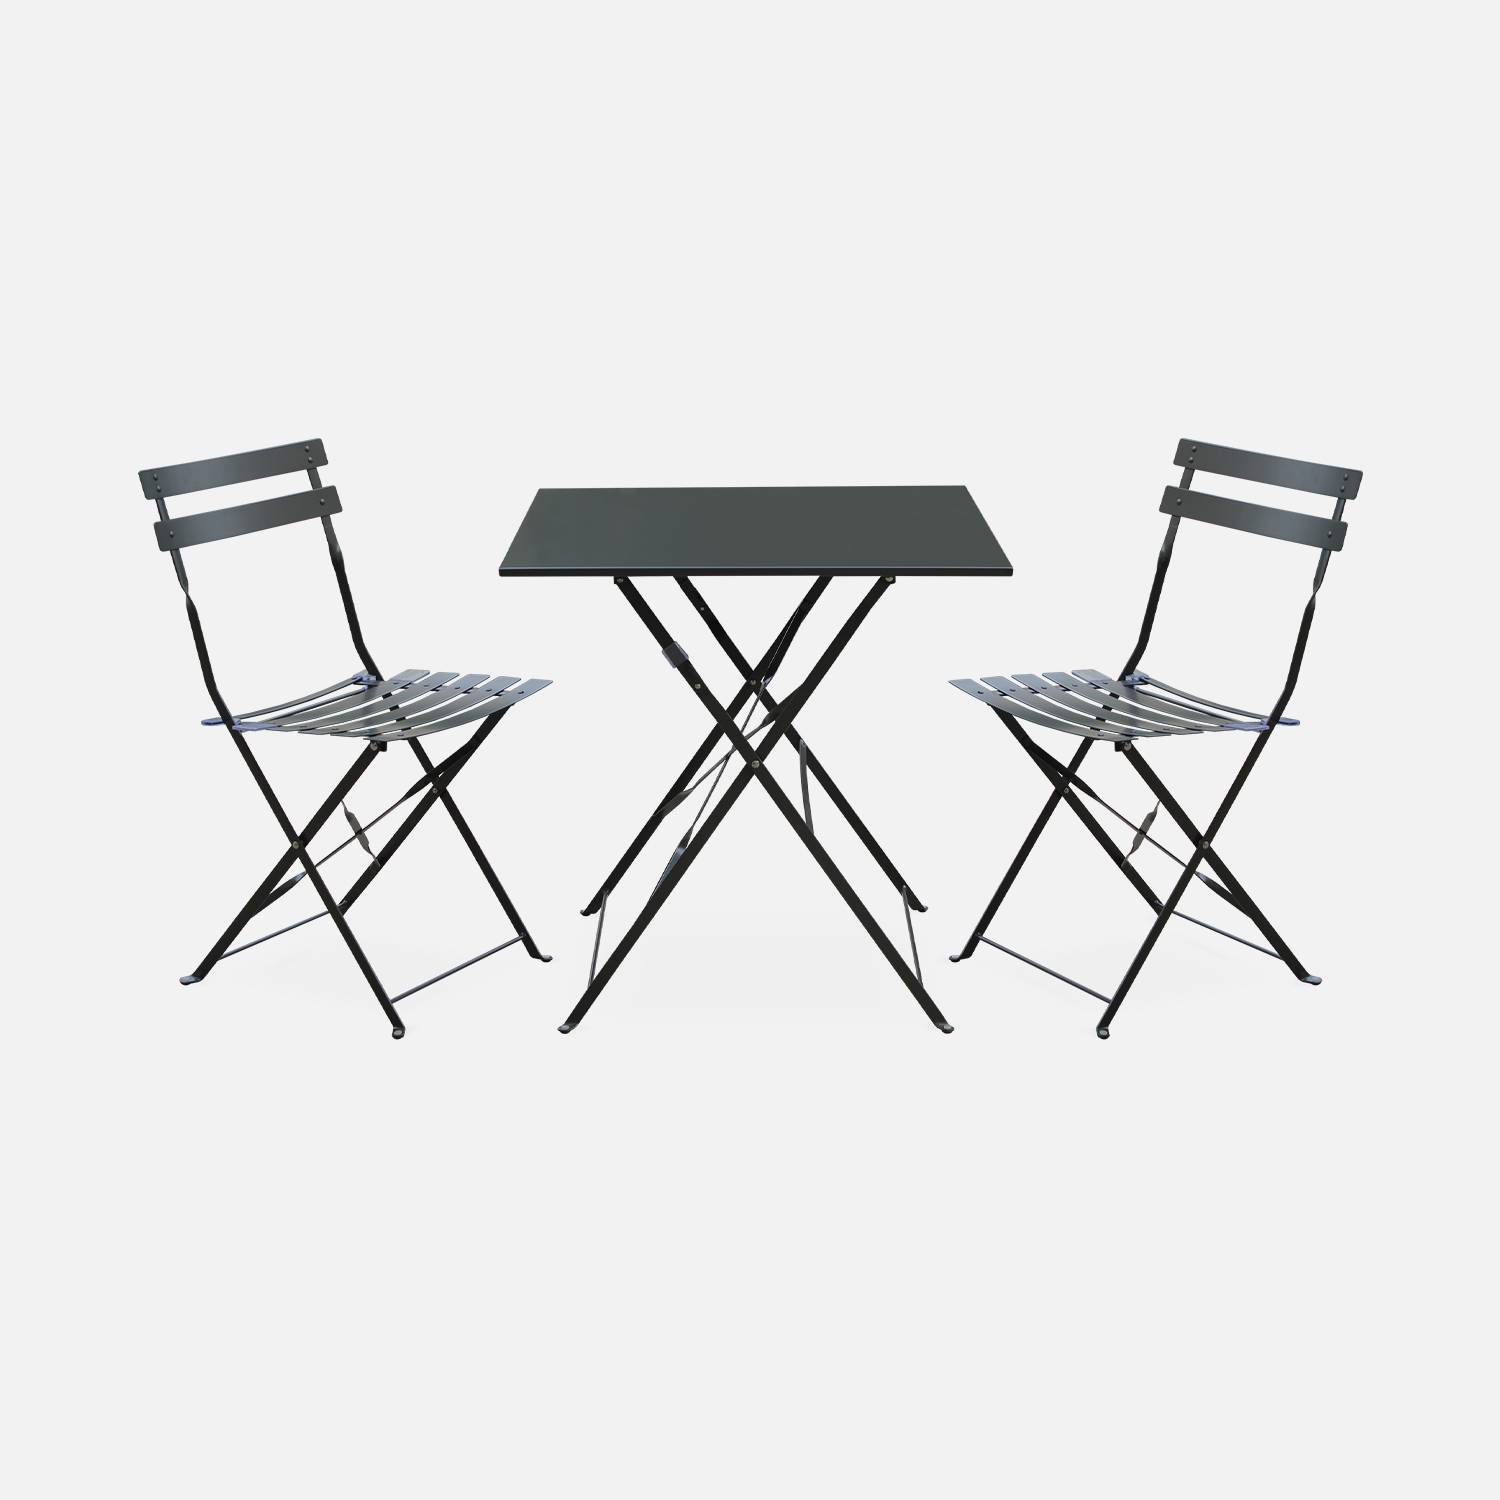 2-seater foldable thermo-lacquered steel bistro garden table with chairs, 70x70cm, Anthracite | sweeek